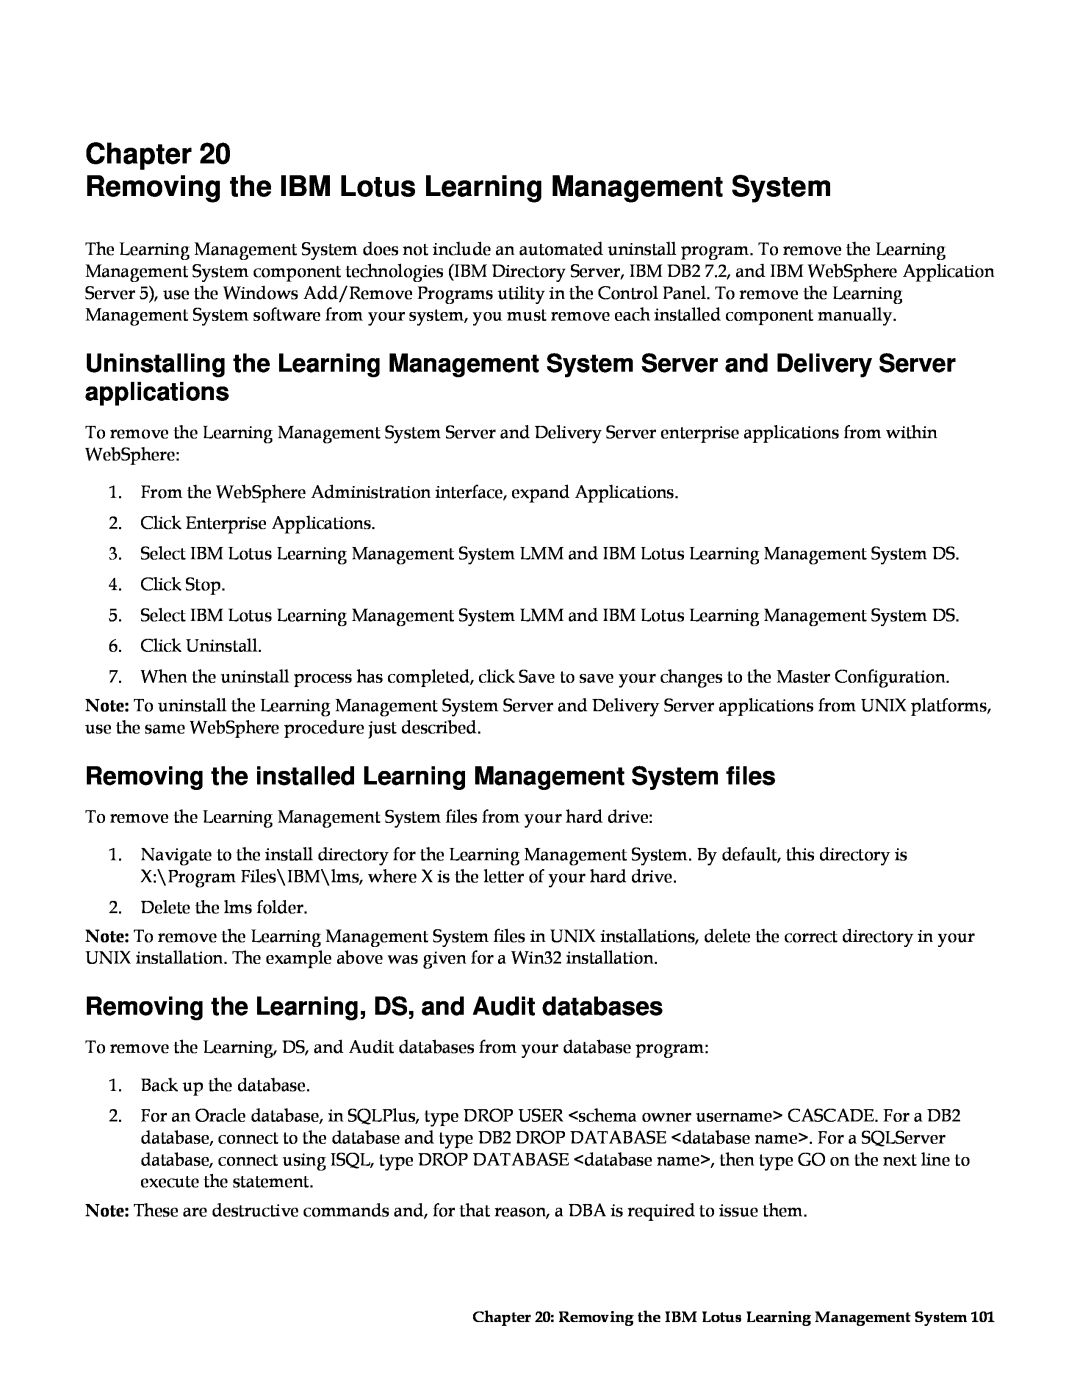 IBM G210-1784-00 Chapter Removing the IBM Lotus Learning Management System, Removing the Learning, DS, and Audit databases 